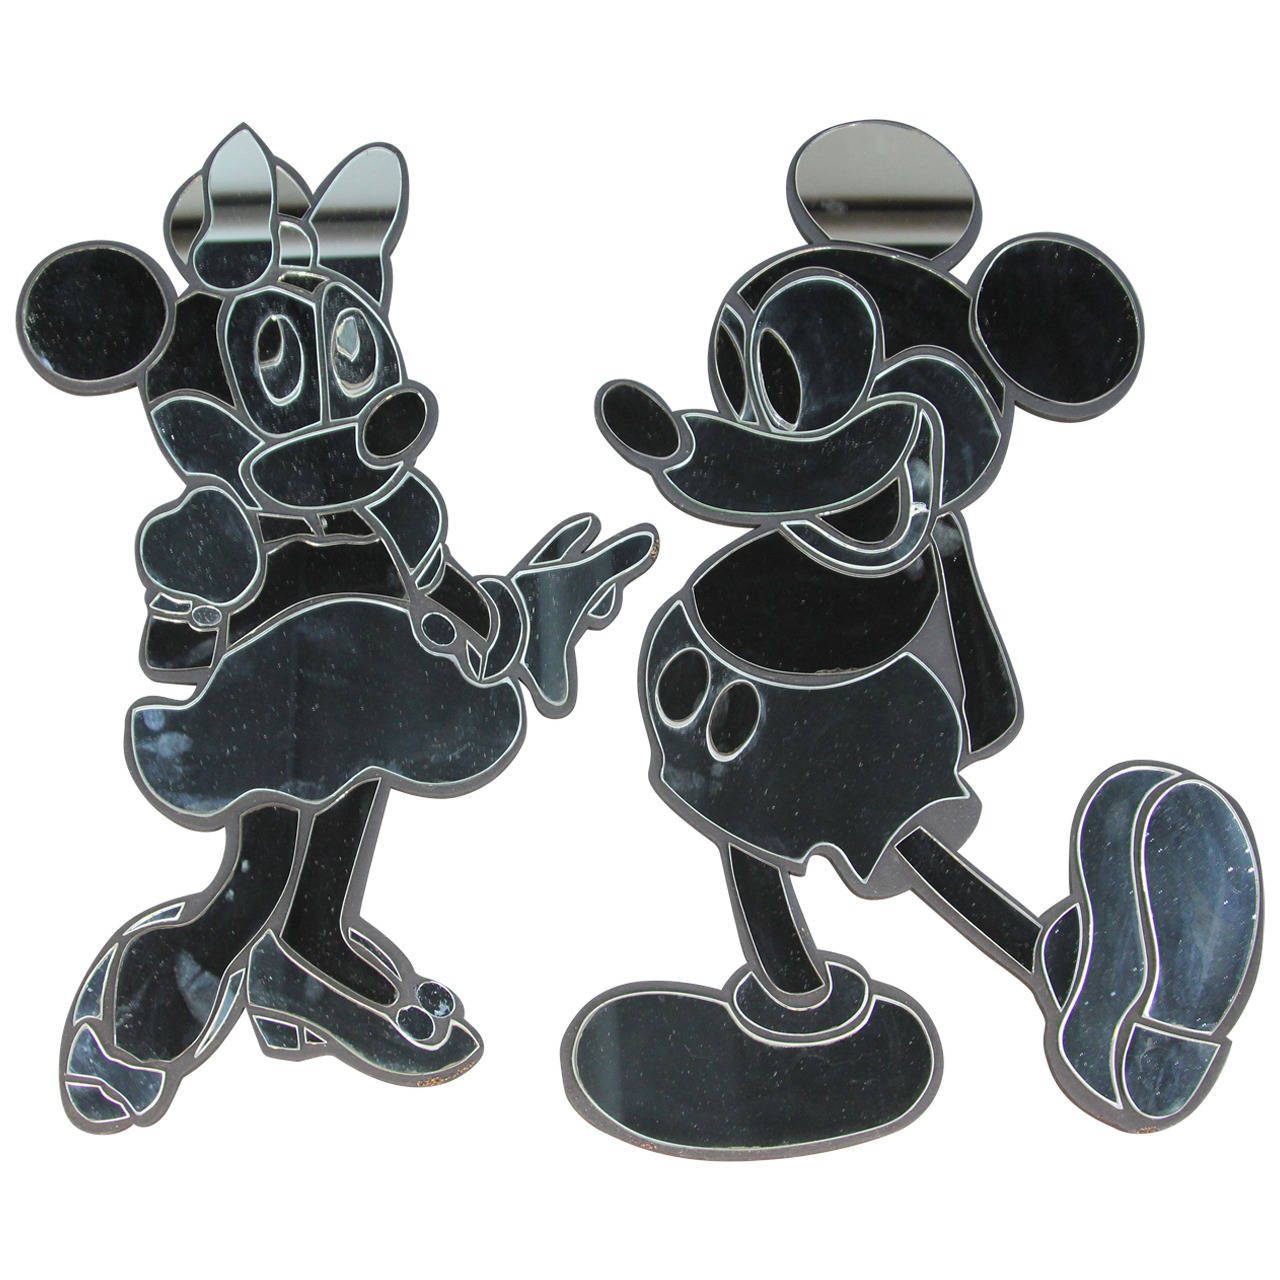 Fashionable Mickey Mouse Wall Mirrors Within Fantastic Disney Mickey & Minnie Mirrorsdavid Marshall (View 5 of 20)